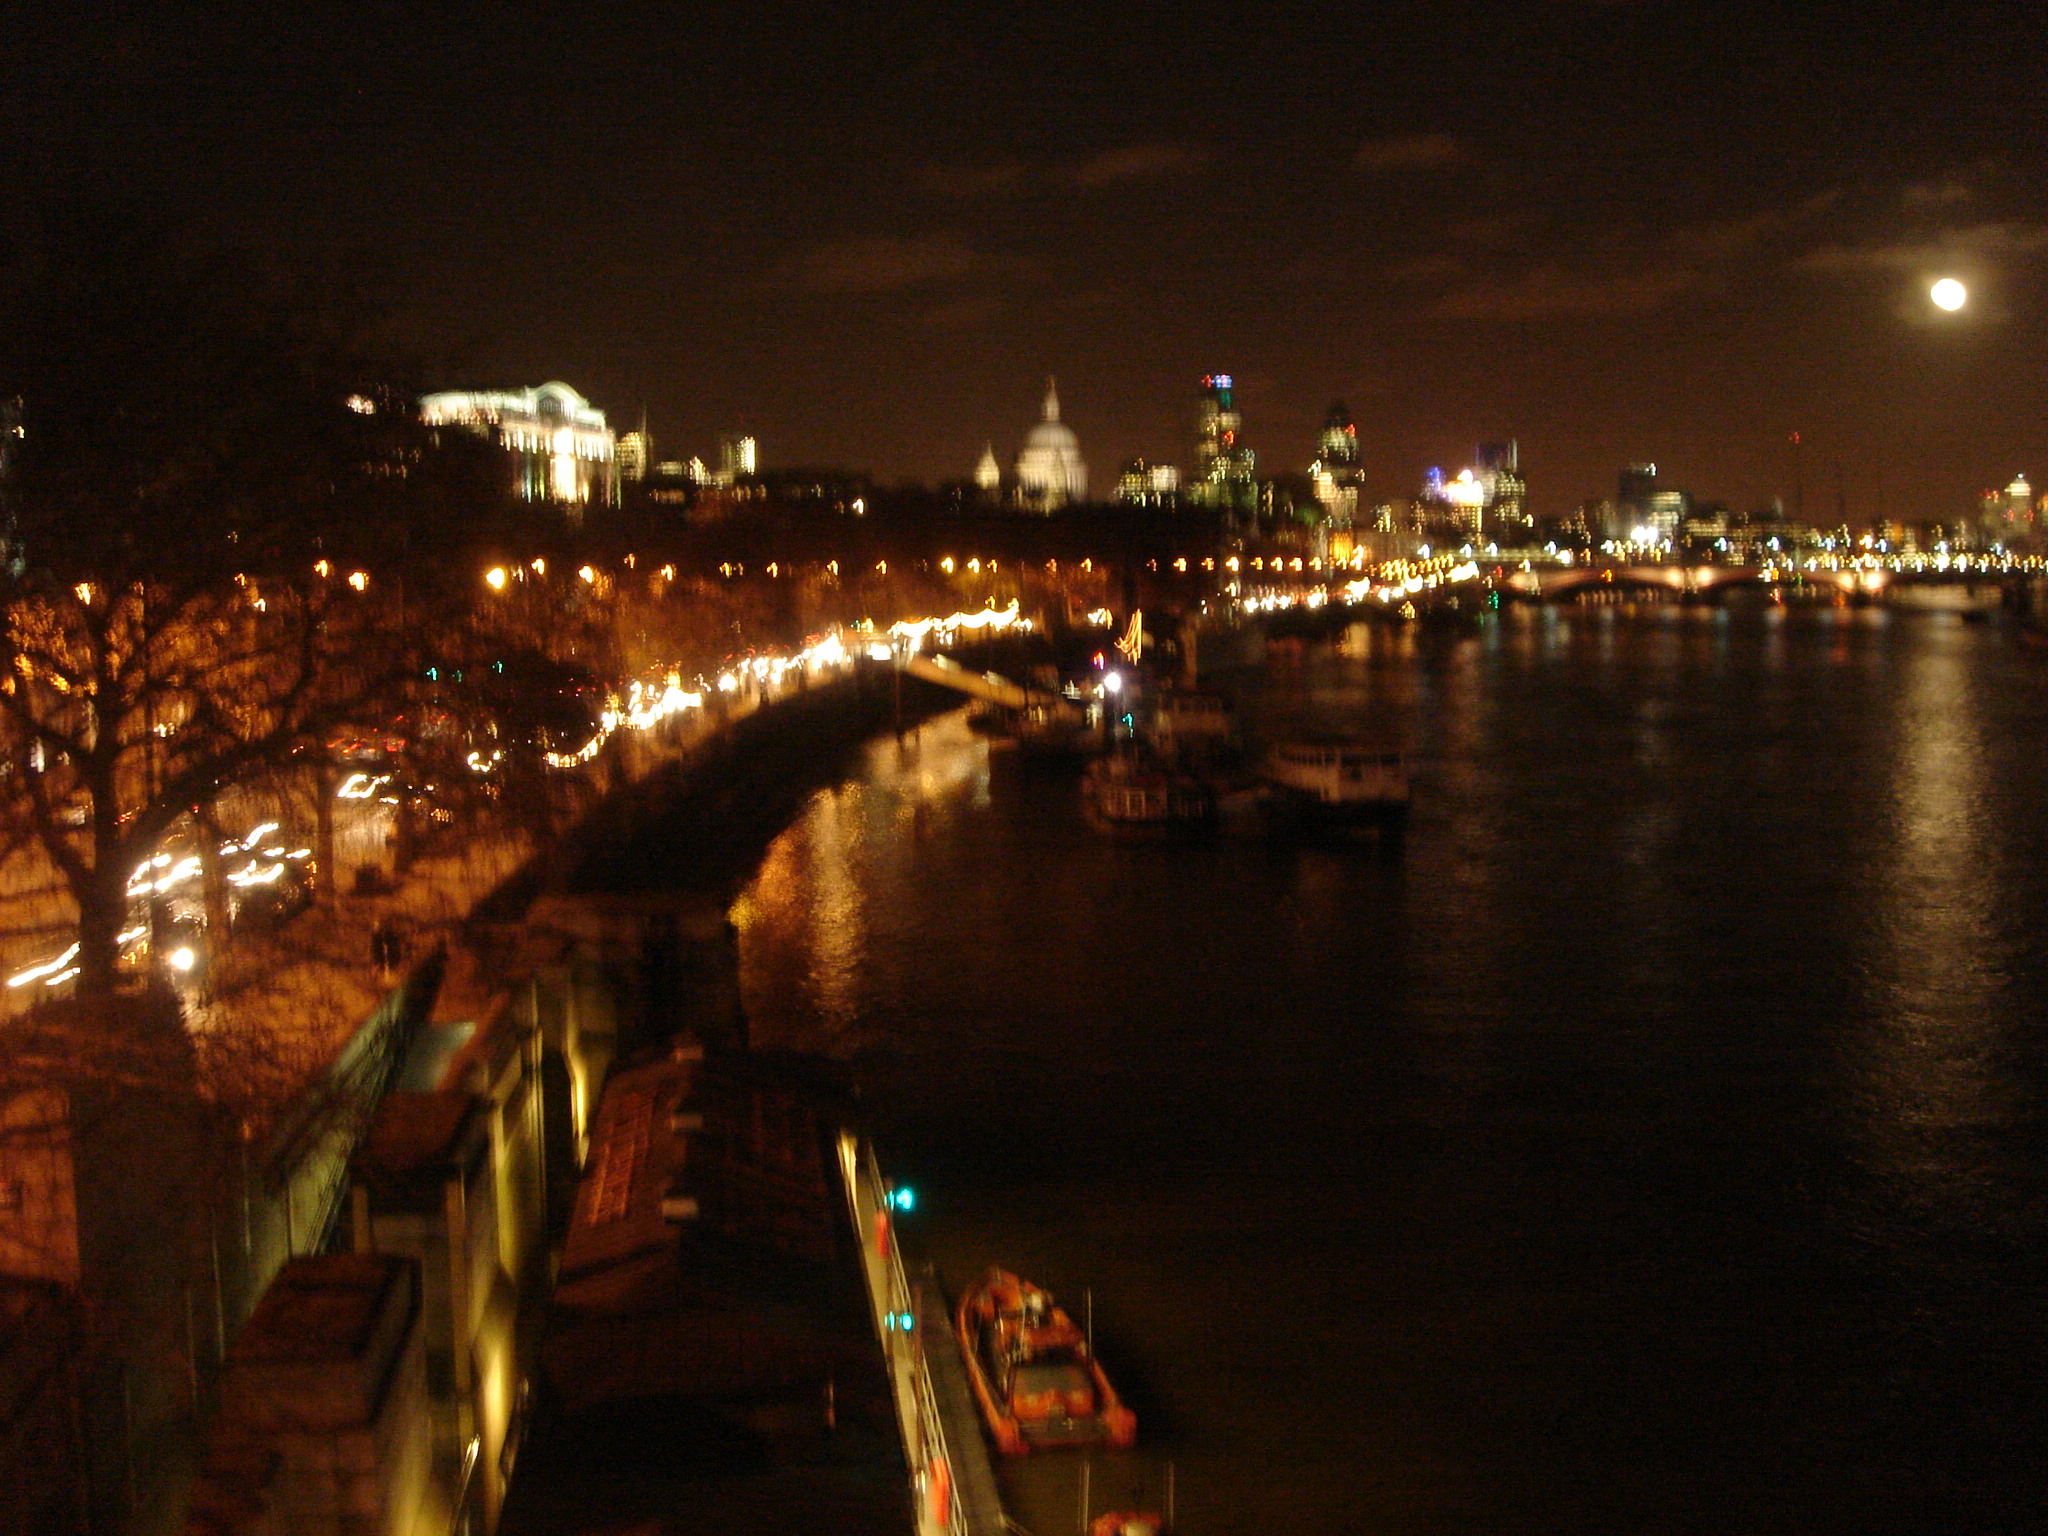 a night time view of boats on the water near the city lights